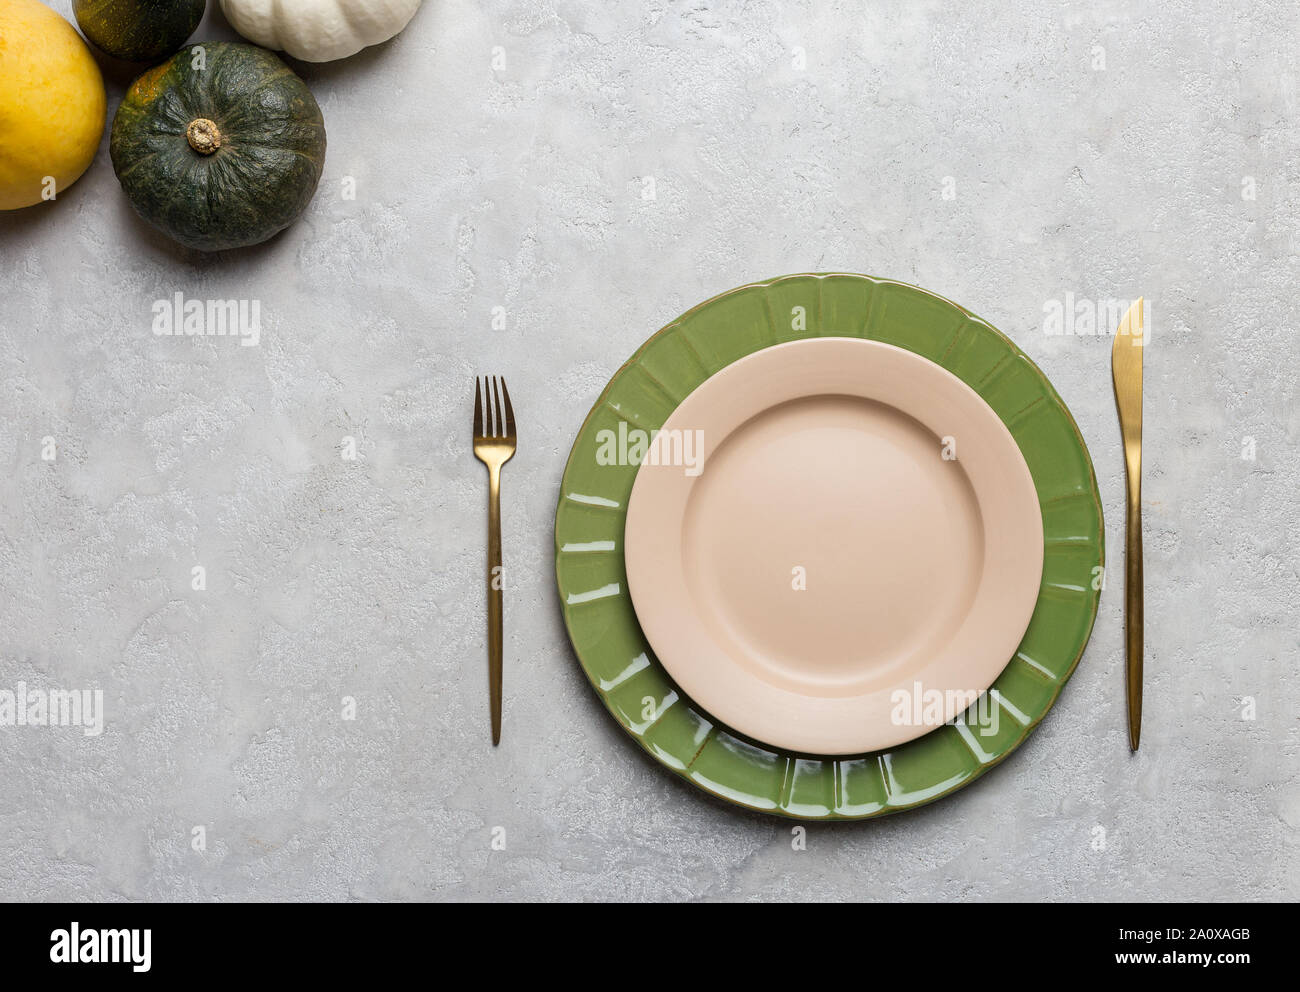 Seasonal table setting on gray concrete background with pumpkins and golden fork and knife. Stock Photo